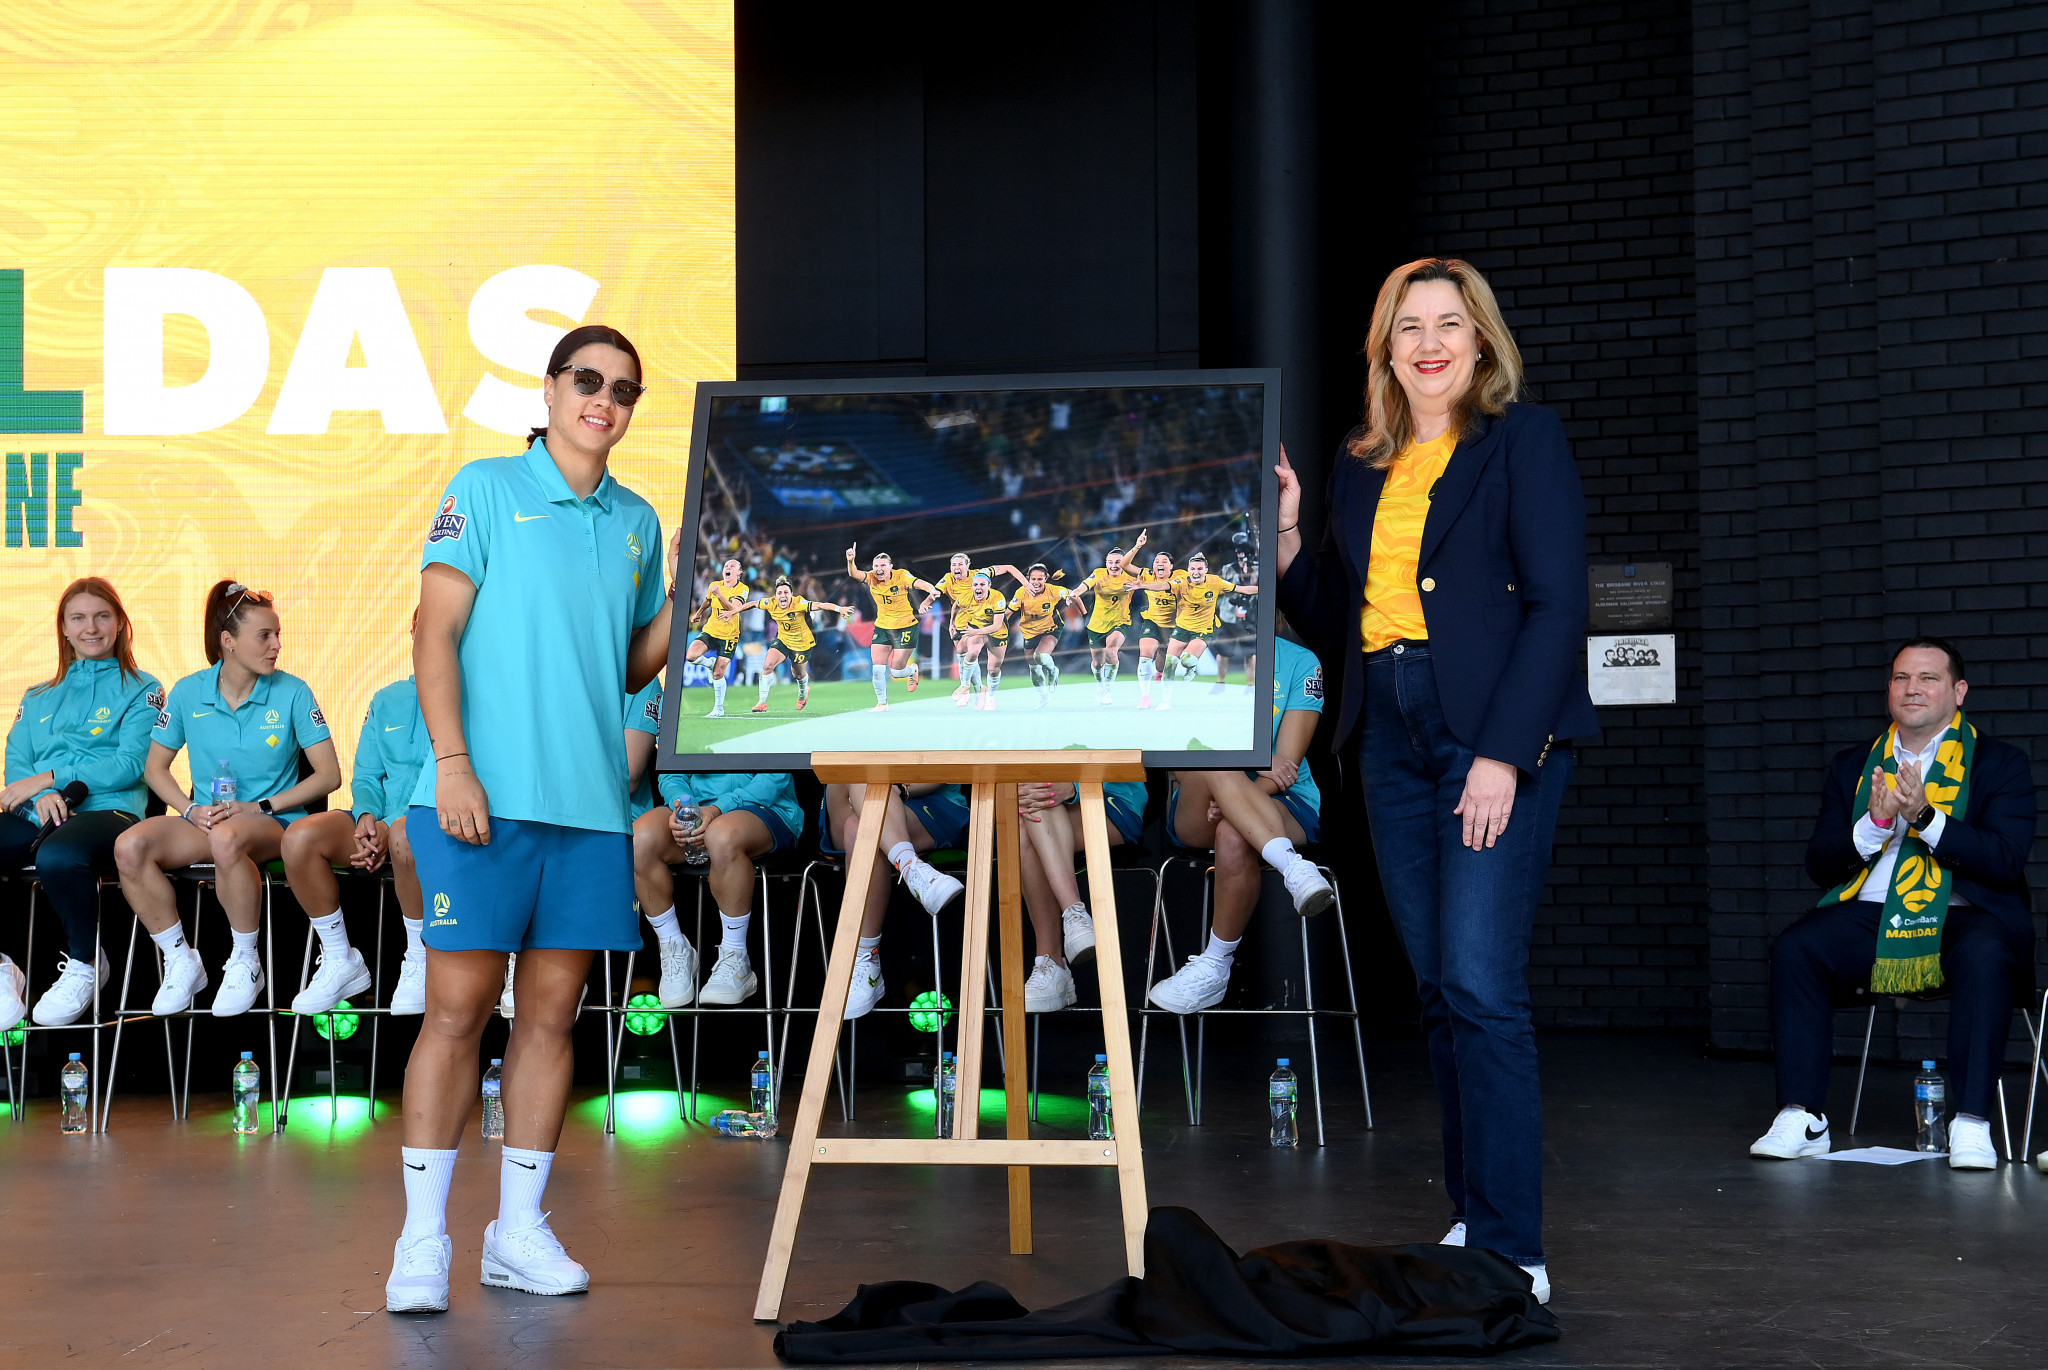 Australia's Sam Kerr received a mural from Queensland Premier Annastacia Palaszczuk remembering their FIFA Women's World Cup quarter-final penalty shoot-out victory over France ©Getty Images